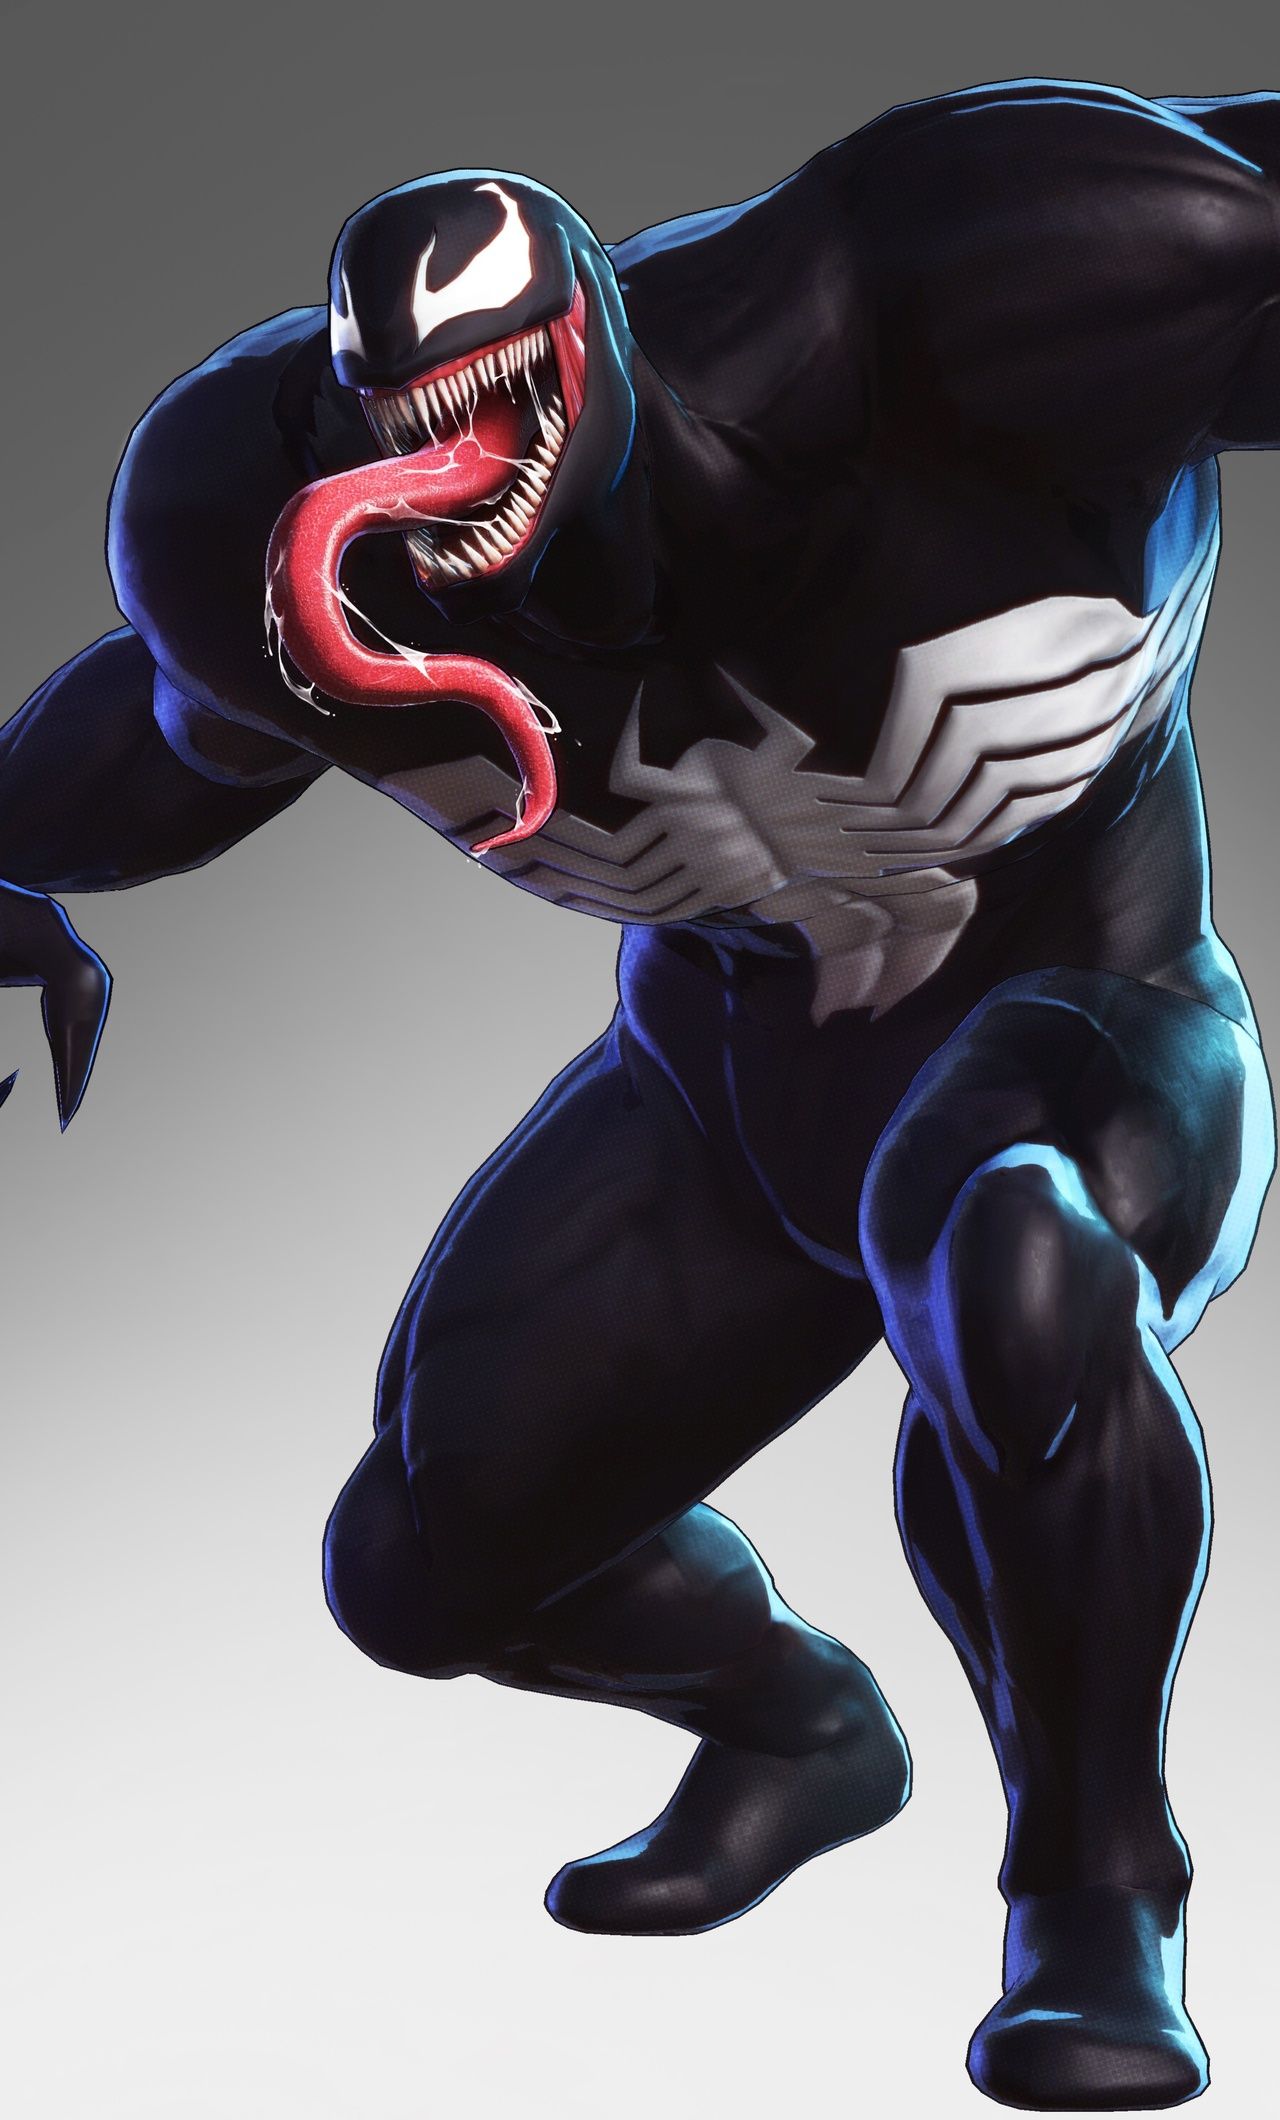 Marvel Ultimate Alliance 3 2019 Venom iPhone HD 4k Wallpaper, Image, Background, Photo and Picture